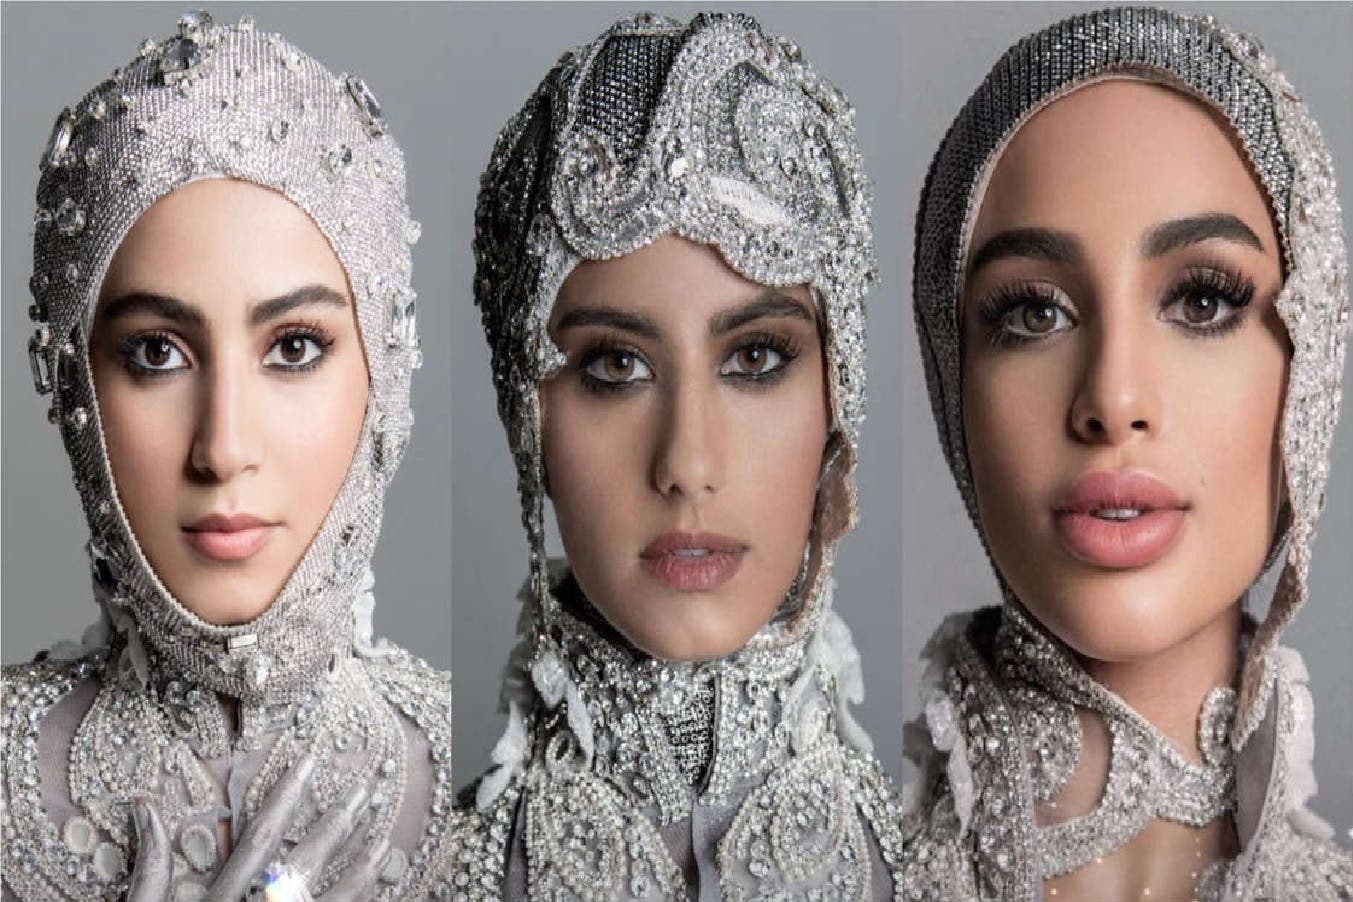 Emirati models Marwa Al Hashemi, Ameera Alawadhi and Reem Birdette are among the finalists at the first Miss Universe UAE pageant. Photo: Miss Universe UAE